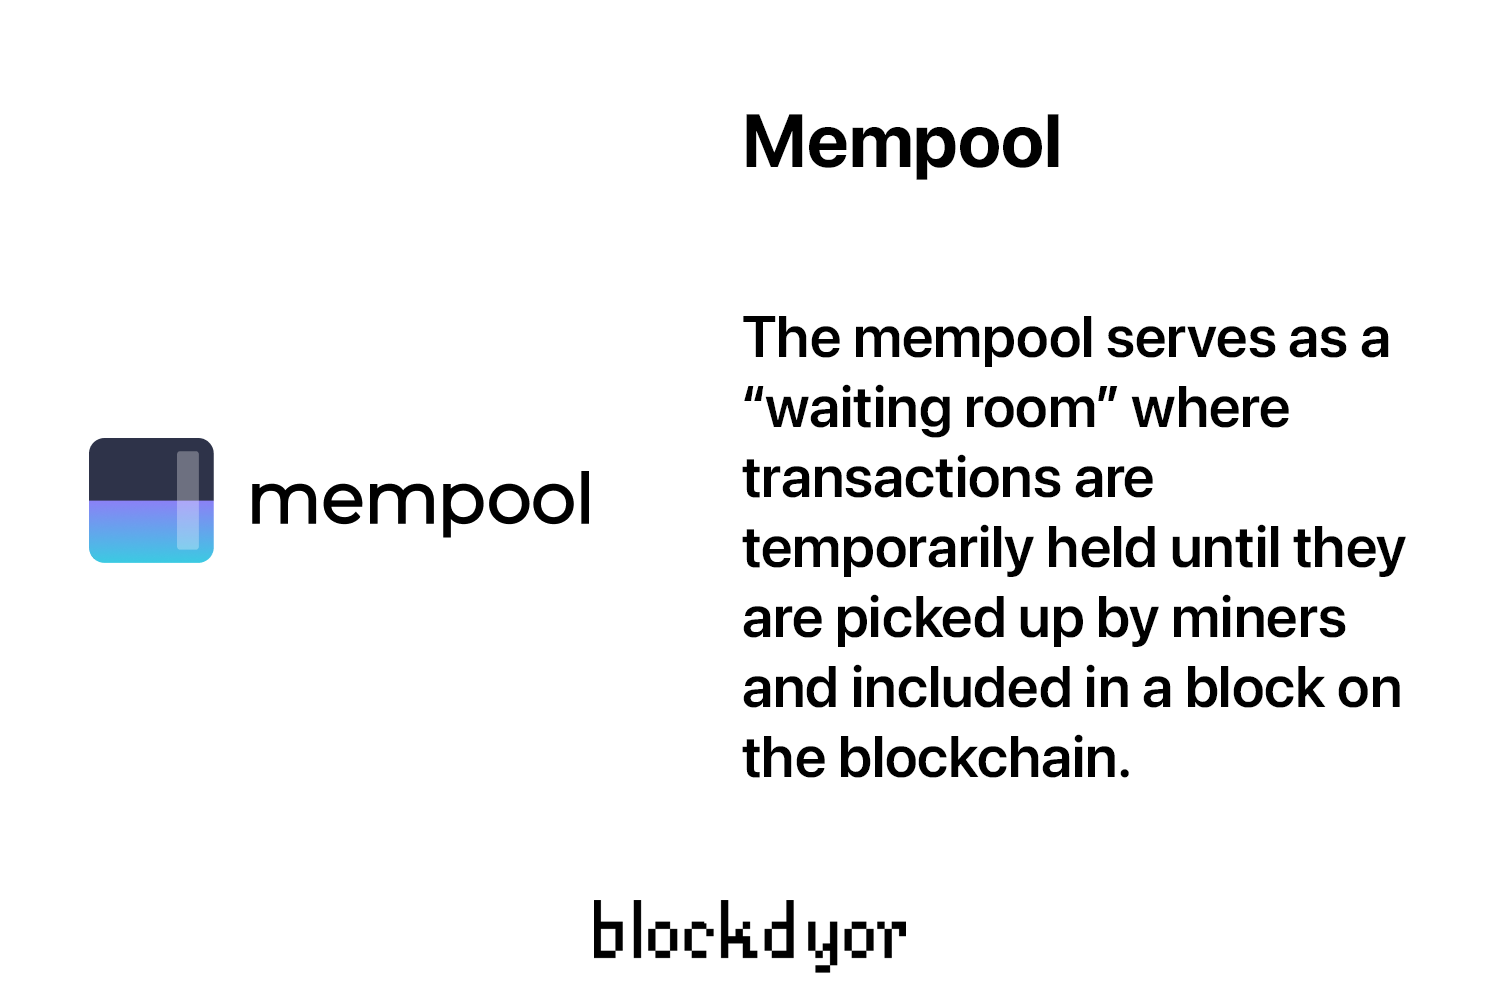 Mempool Overview